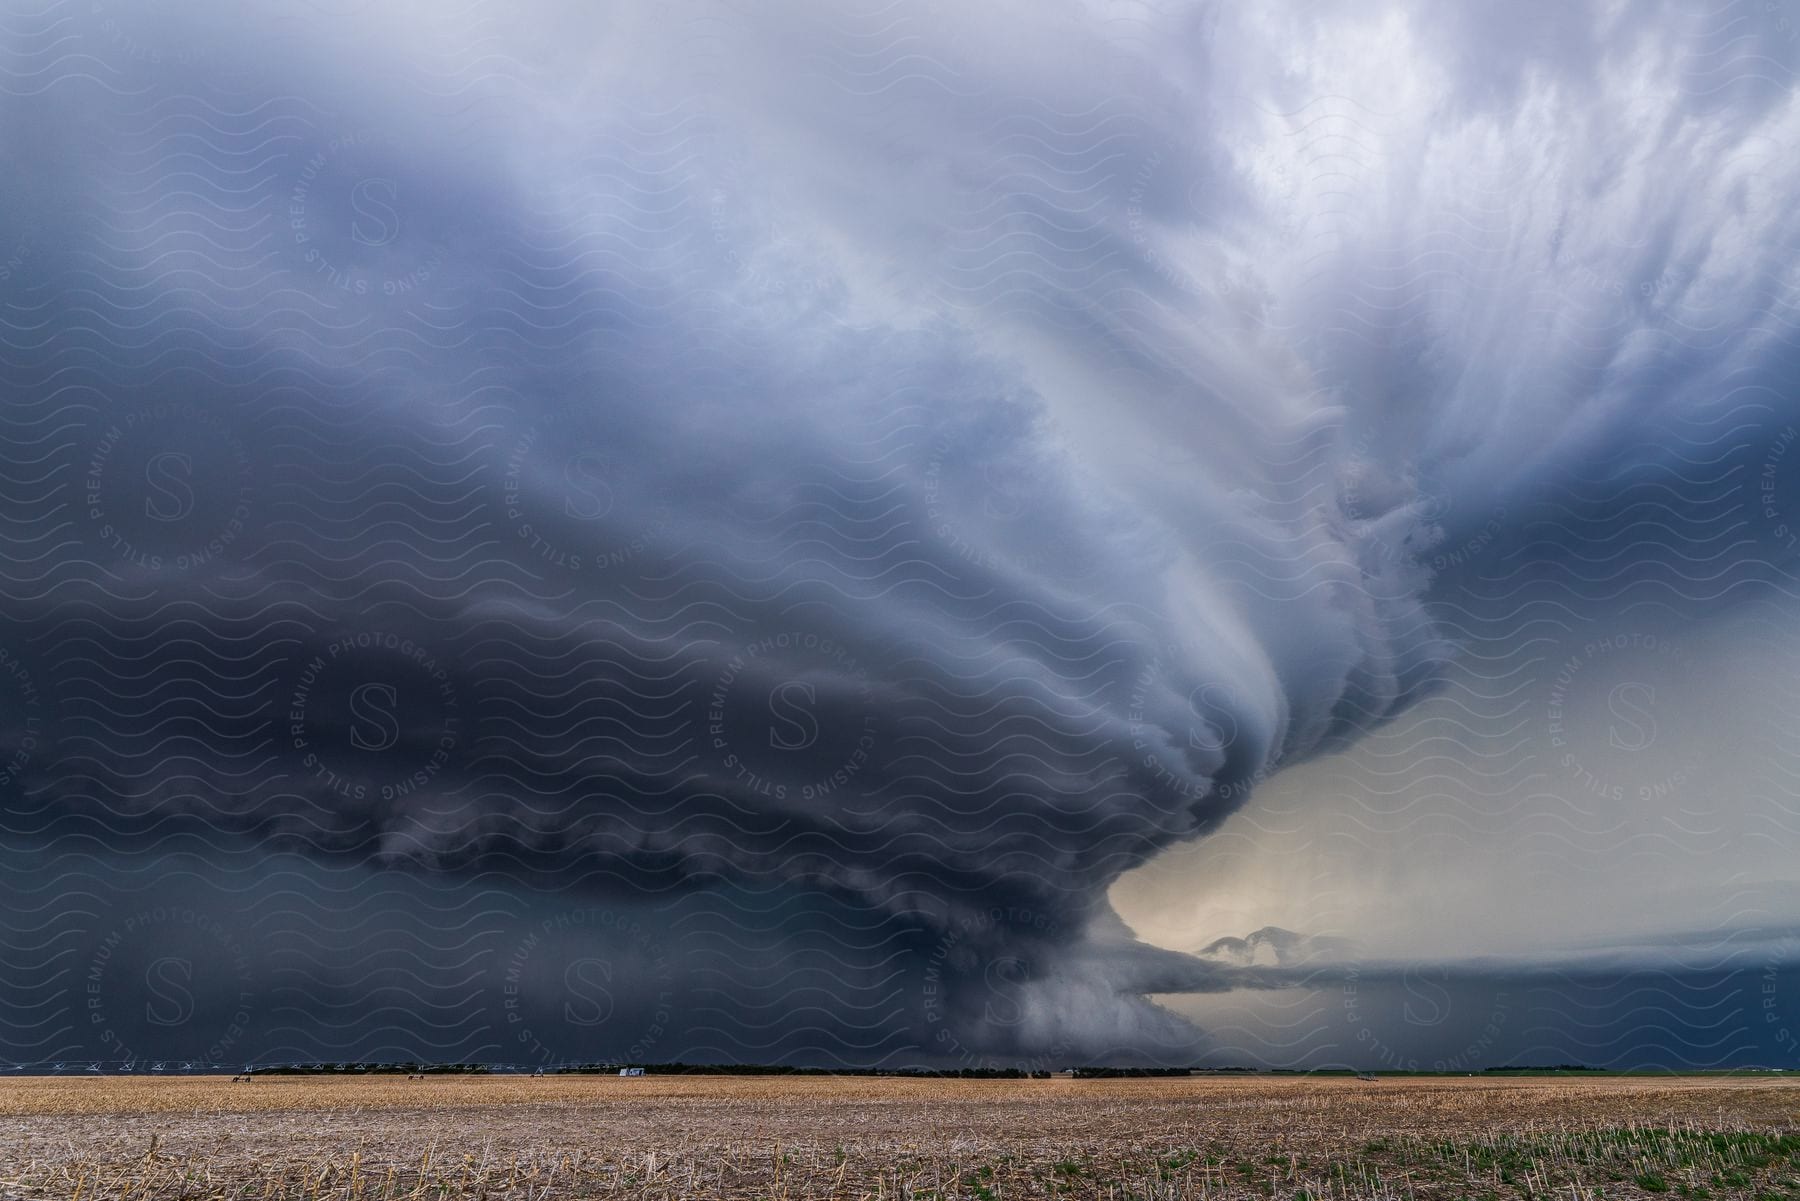 A supercell storm hovers over farmland along the coast displaying impressive structure and spinning motion